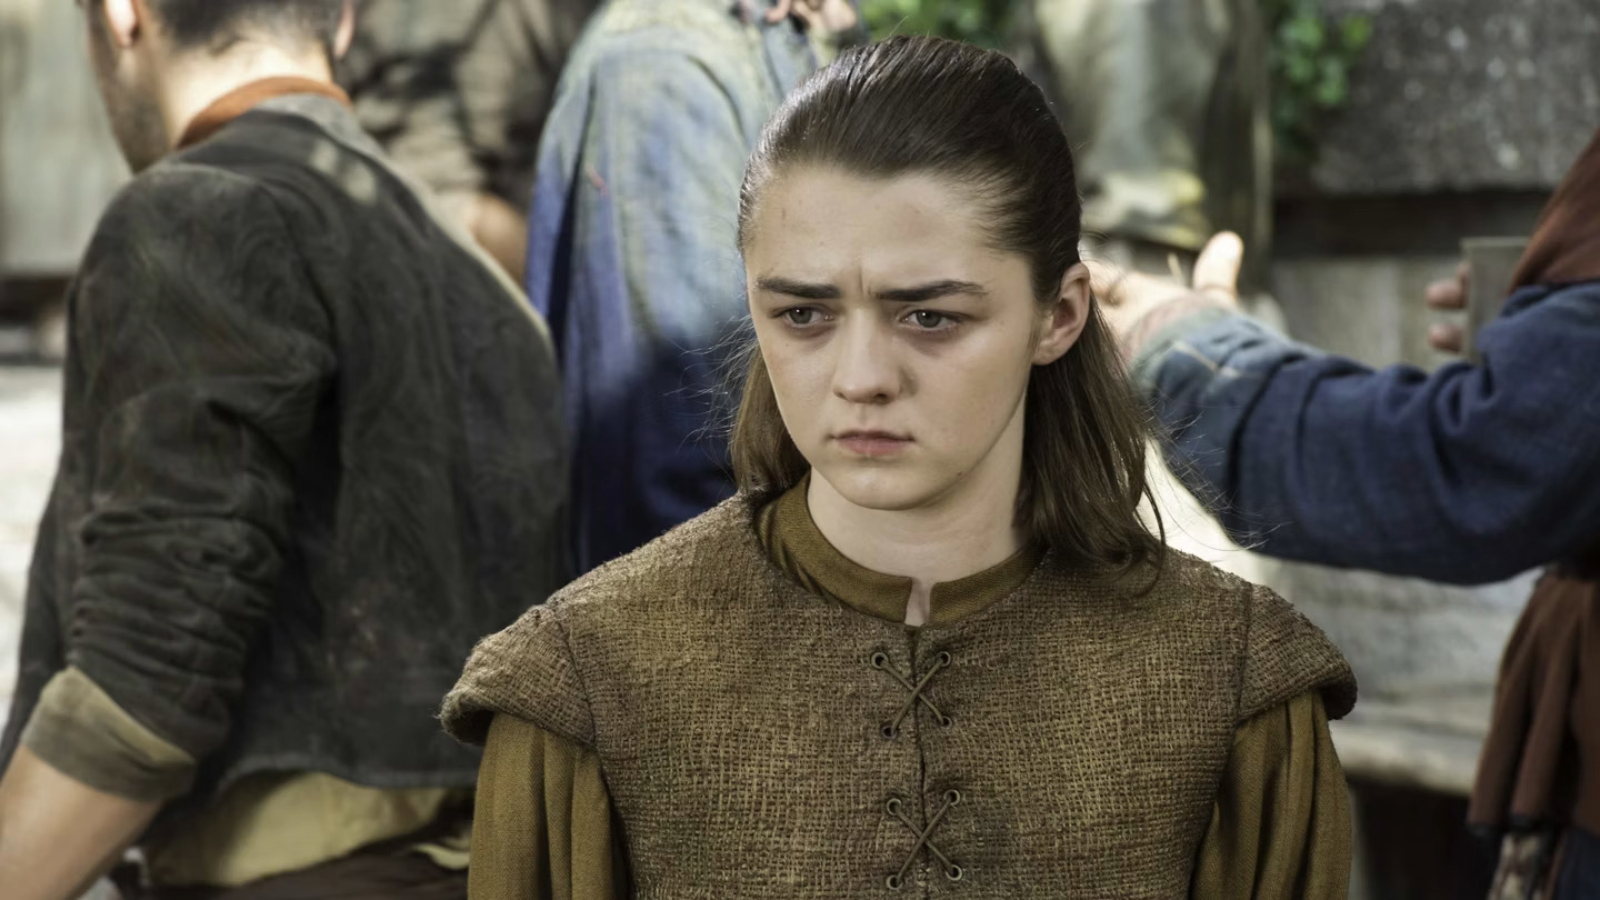 Maisie Williams Reveals Why Game Of Thrones Left Her “lost For So Long